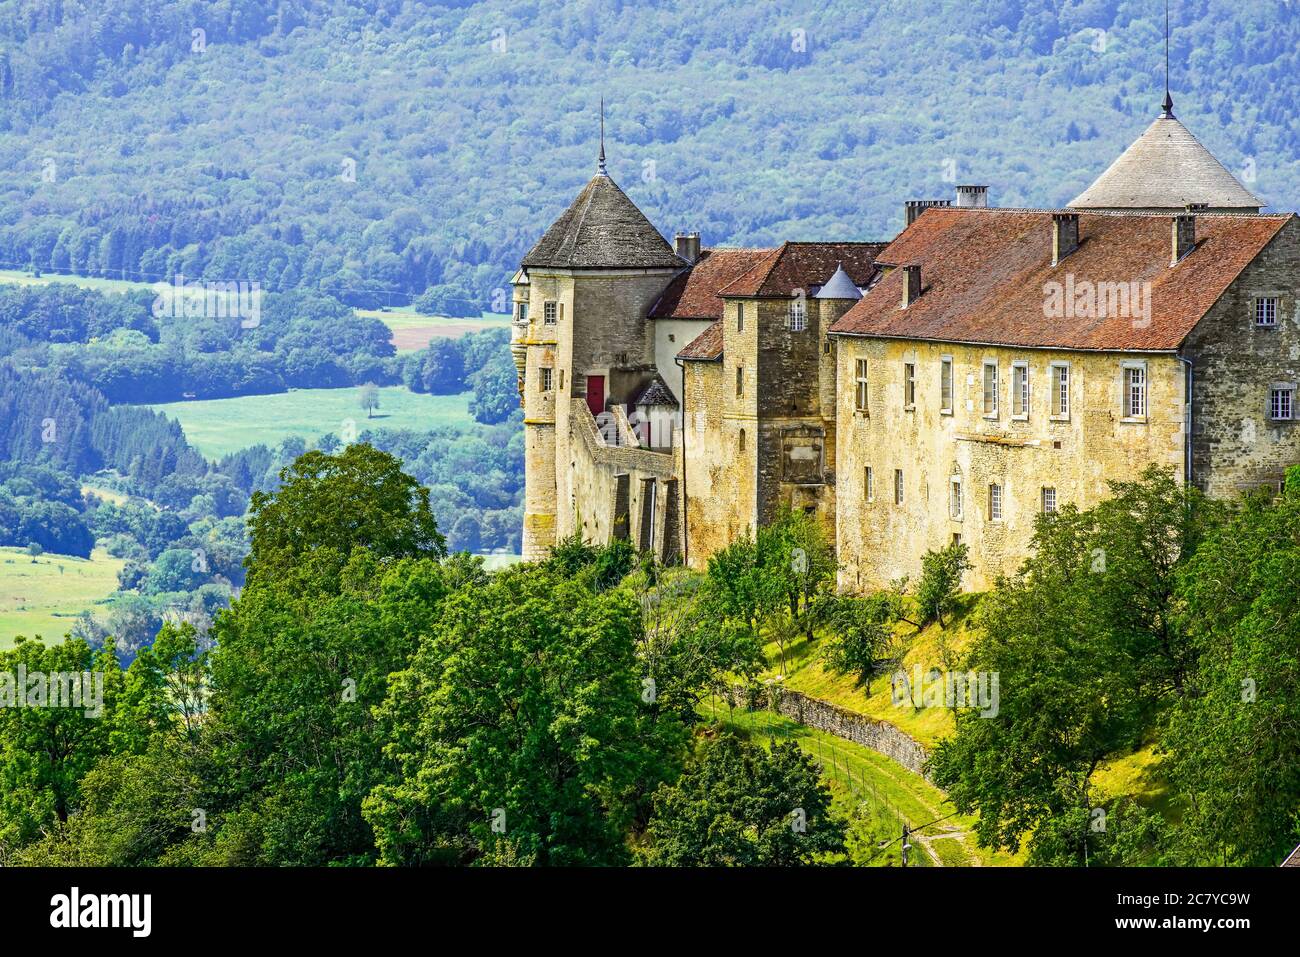 Medieval Chateau (castle) de Belvoir in Doubs department of the Bourgogne-Franche-Comte region in France. Overlooking  the valley of Sancey. Stock Photo